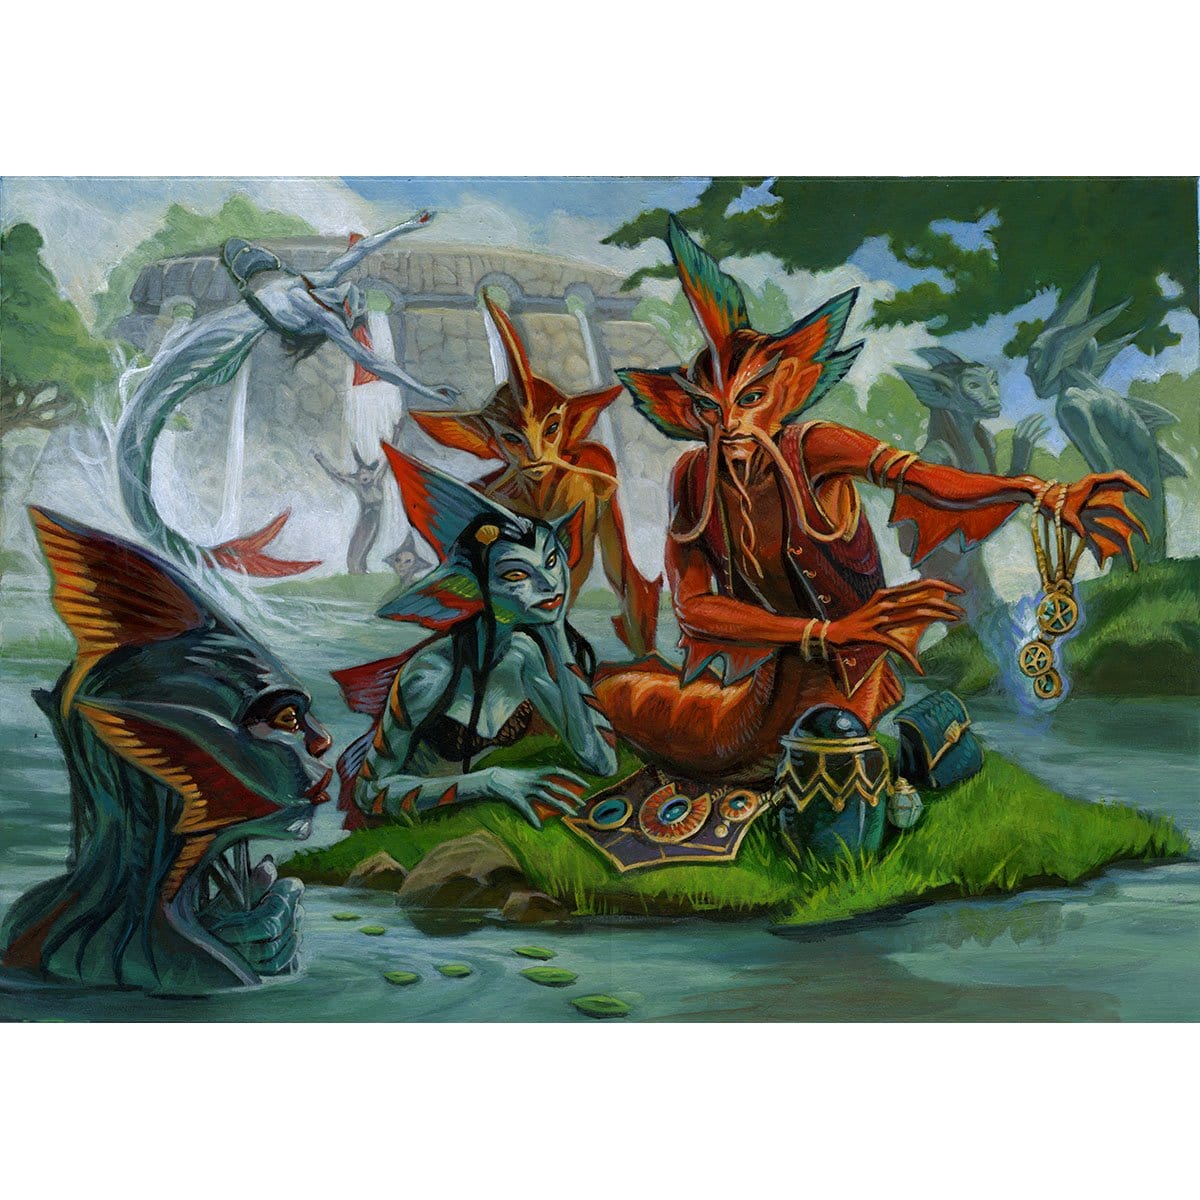 Merrow Commerce Print - Print - Original Magic Art - Accessories for Magic the Gathering and other card games